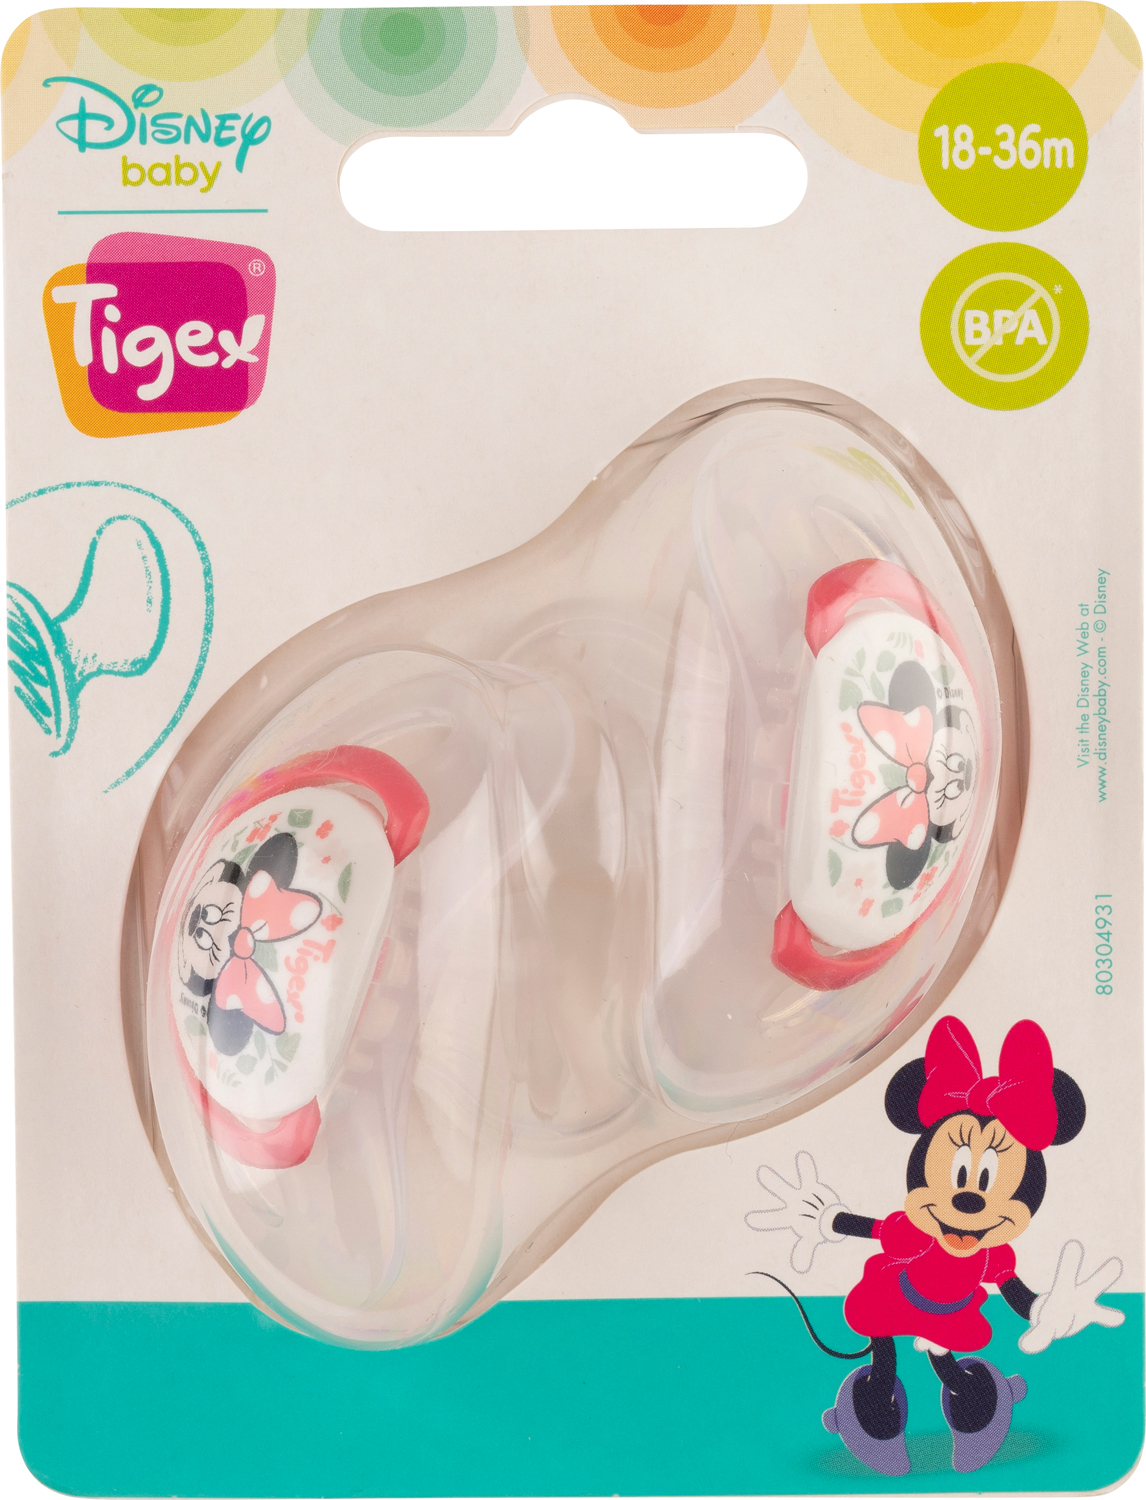 2 CHUPETES SOFT TOUCH FRIENDS 18-36 meses - Tigex